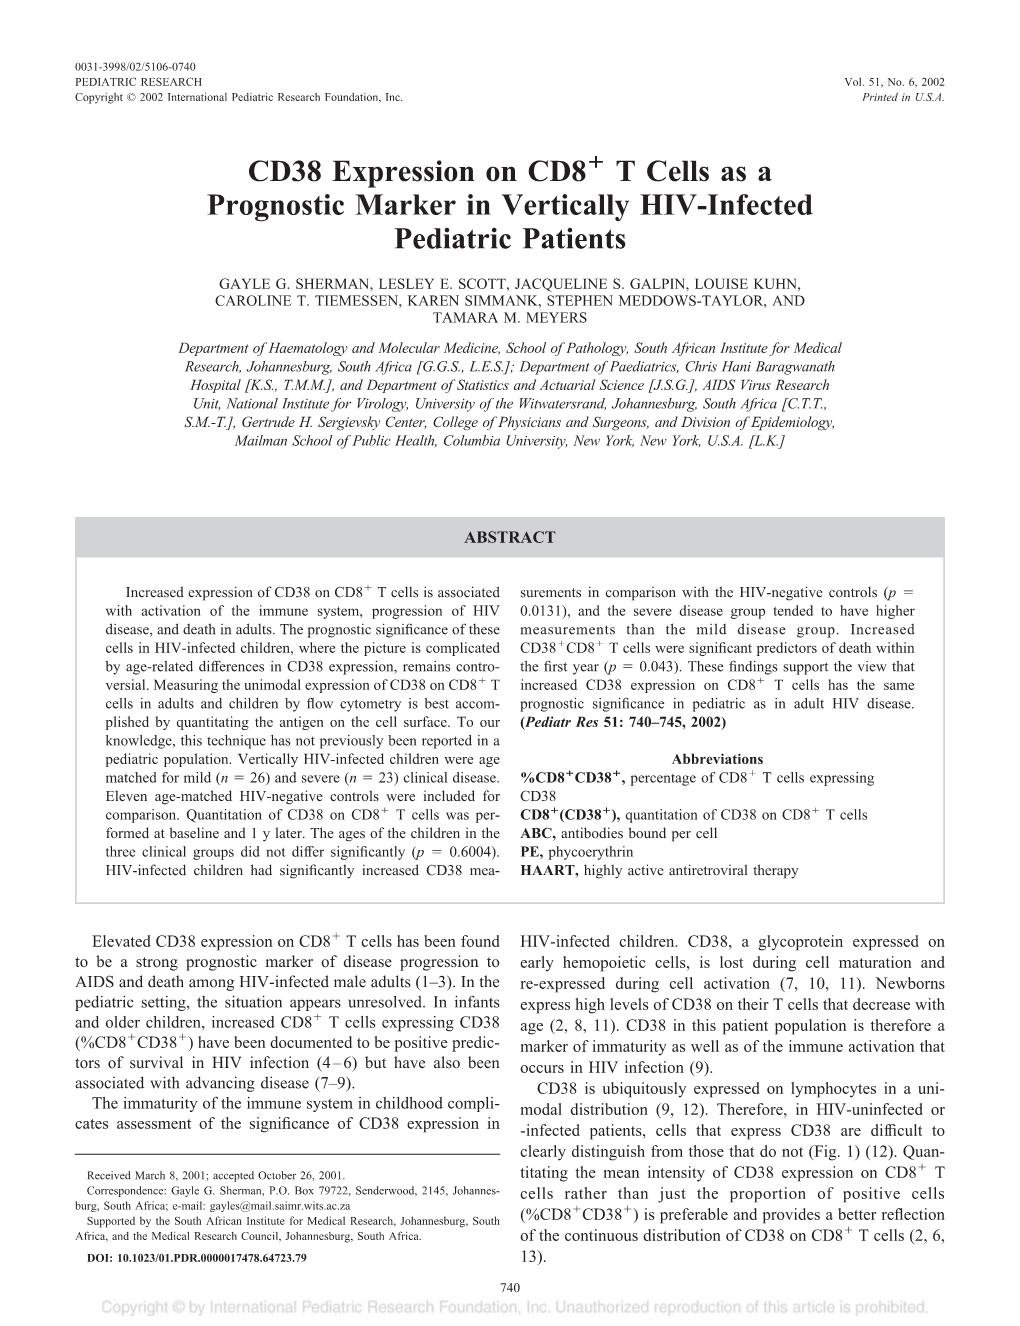 CD38 Expression on CD8 T Cells As a Prognostic Marker in Vertically HIV